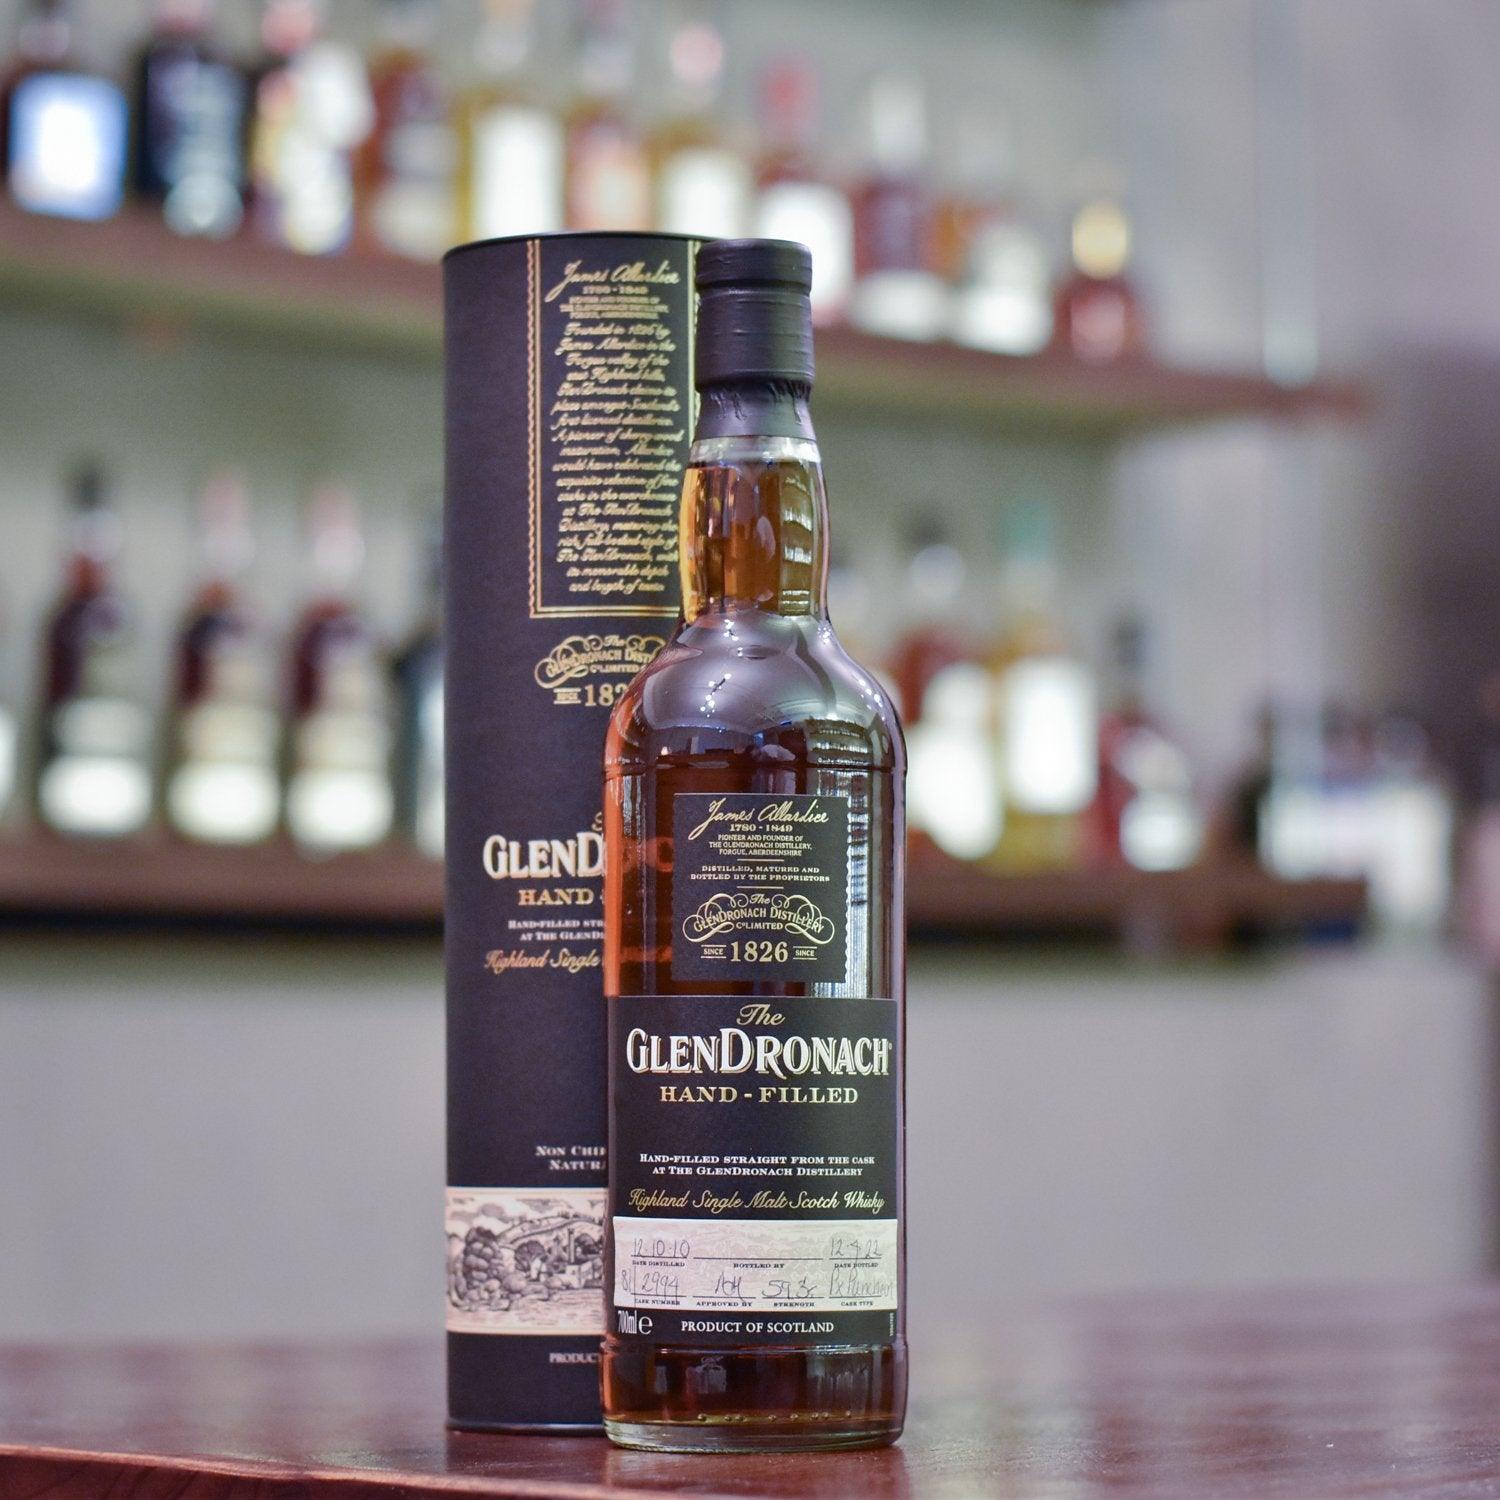 Glendronach 11 Year Old 2010 Hand-filled Cask 2994 - The Rare Malt